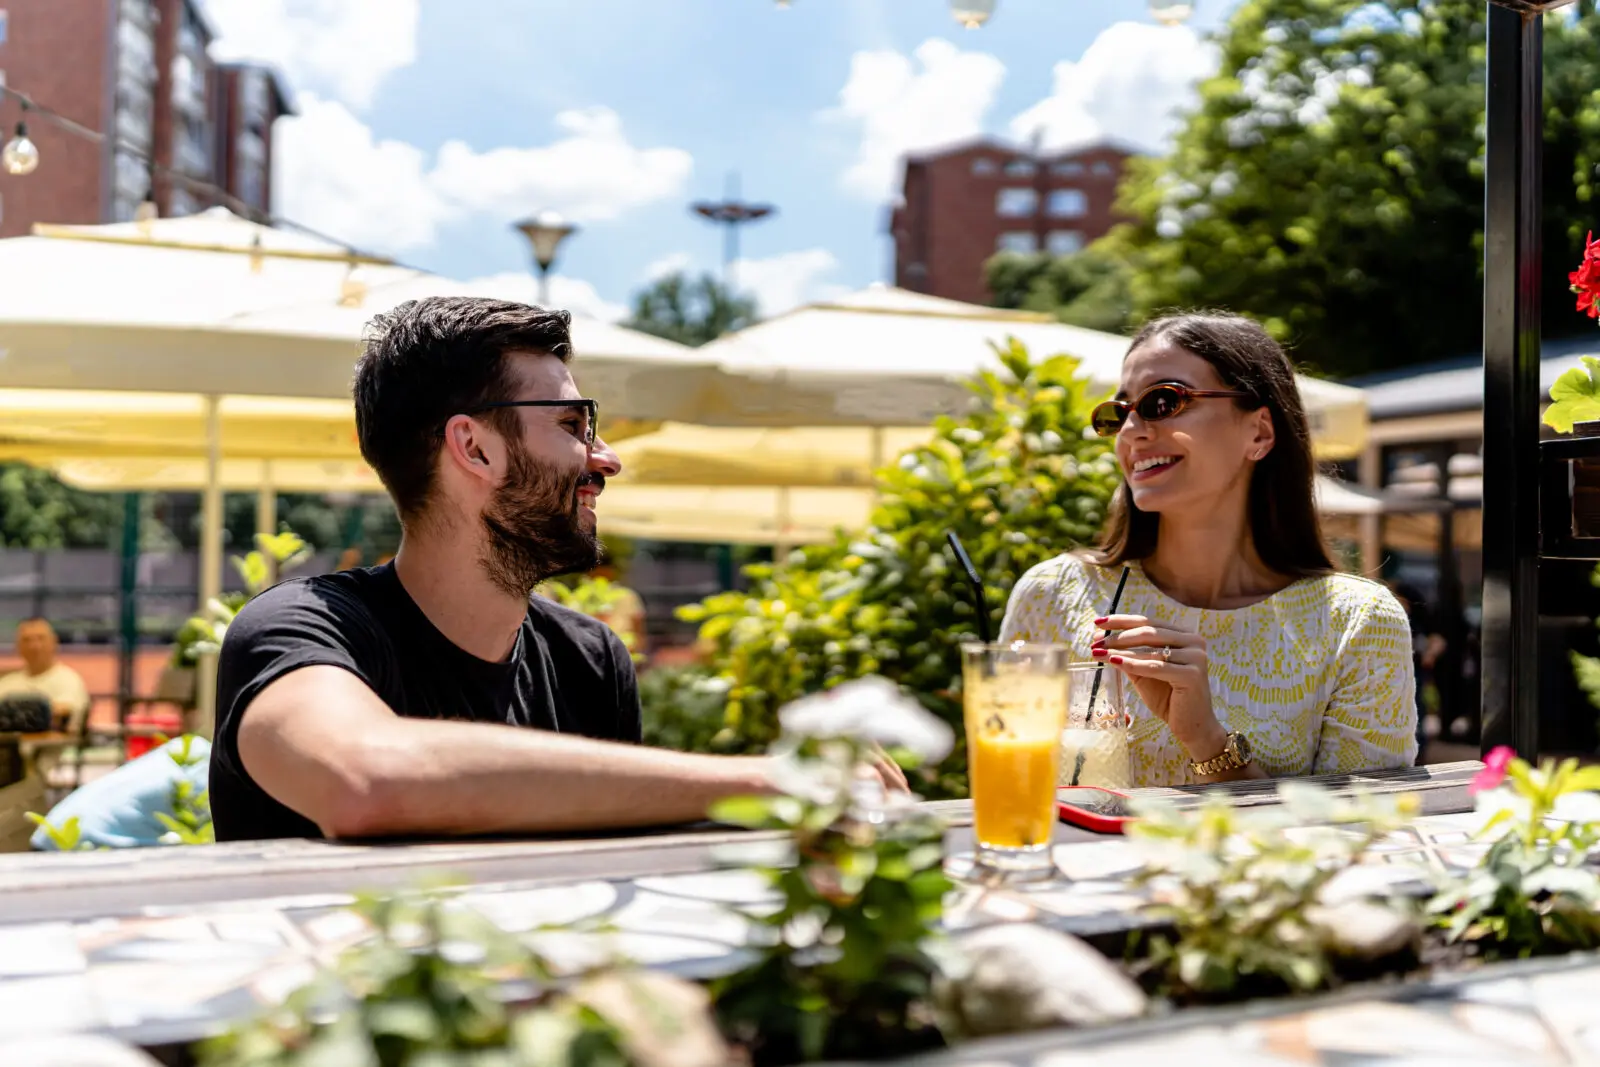 Our Favorite Patio Dining Options in Central Ohio